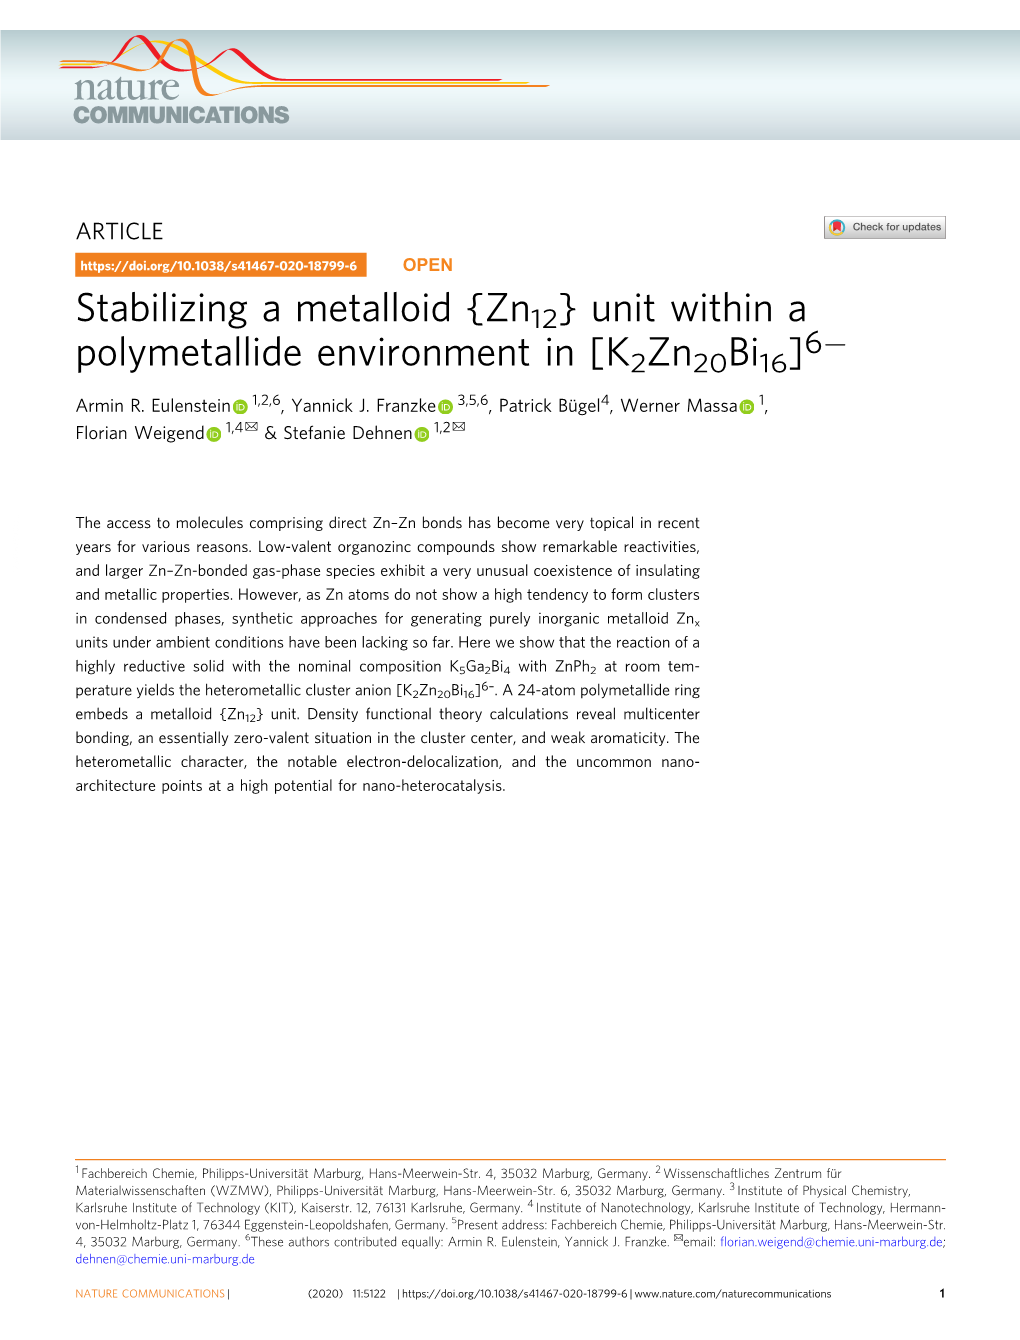 {Zn12} Unit Within a Polymetallide Environment in [K2zn20bi16]